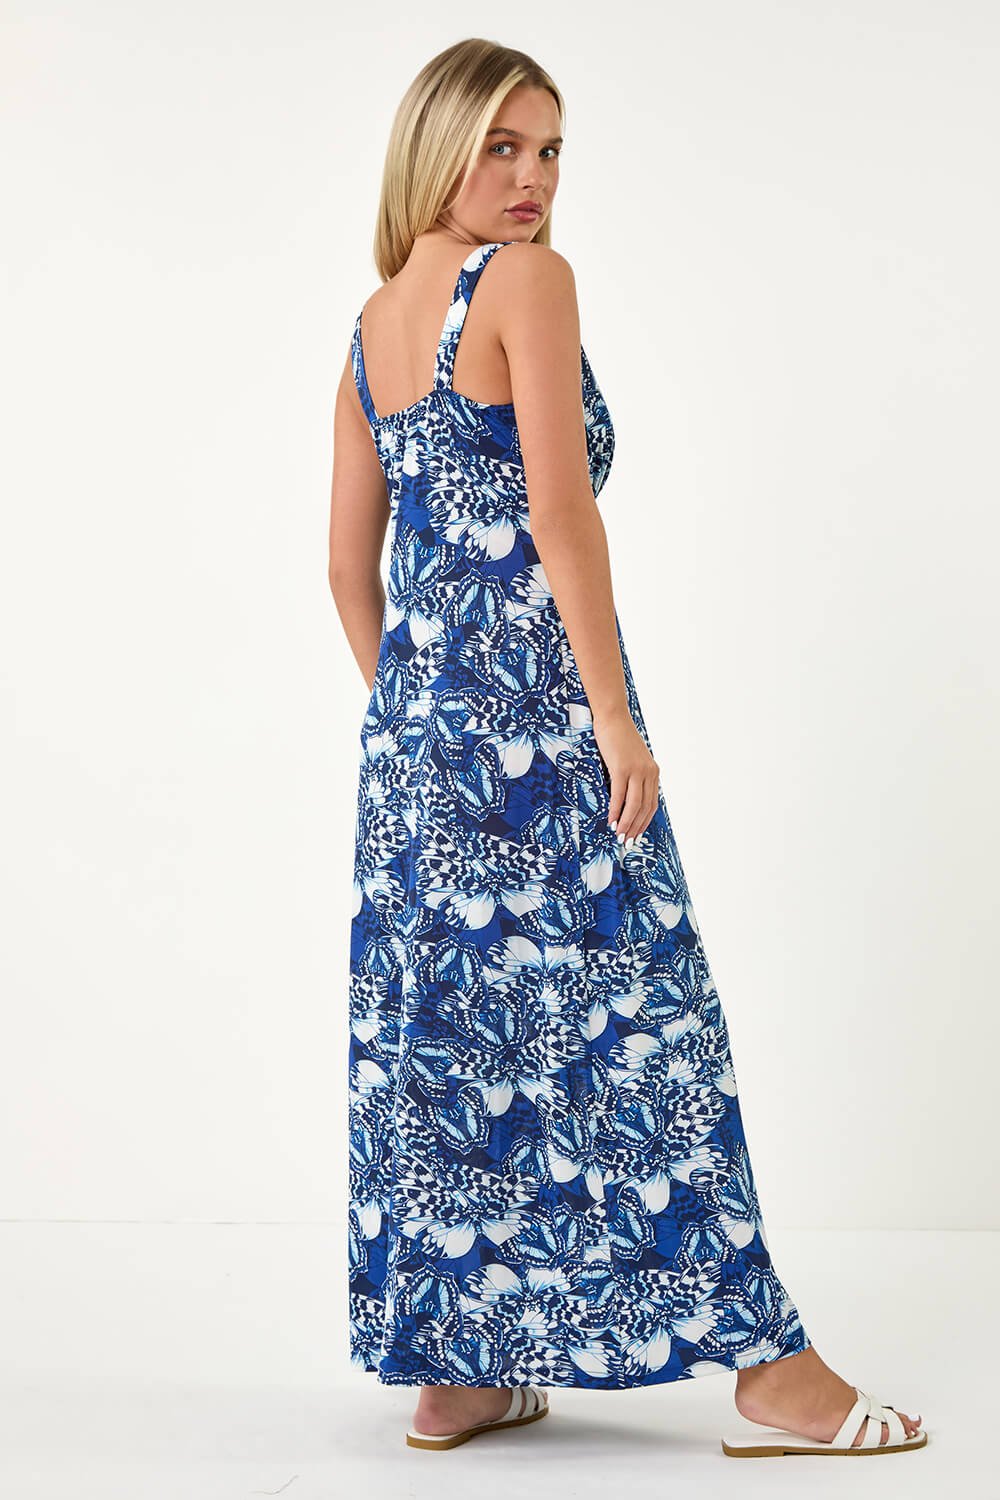 Blue Petite Butterfly Print Stretch Maxi Dress, Image 3 of 5